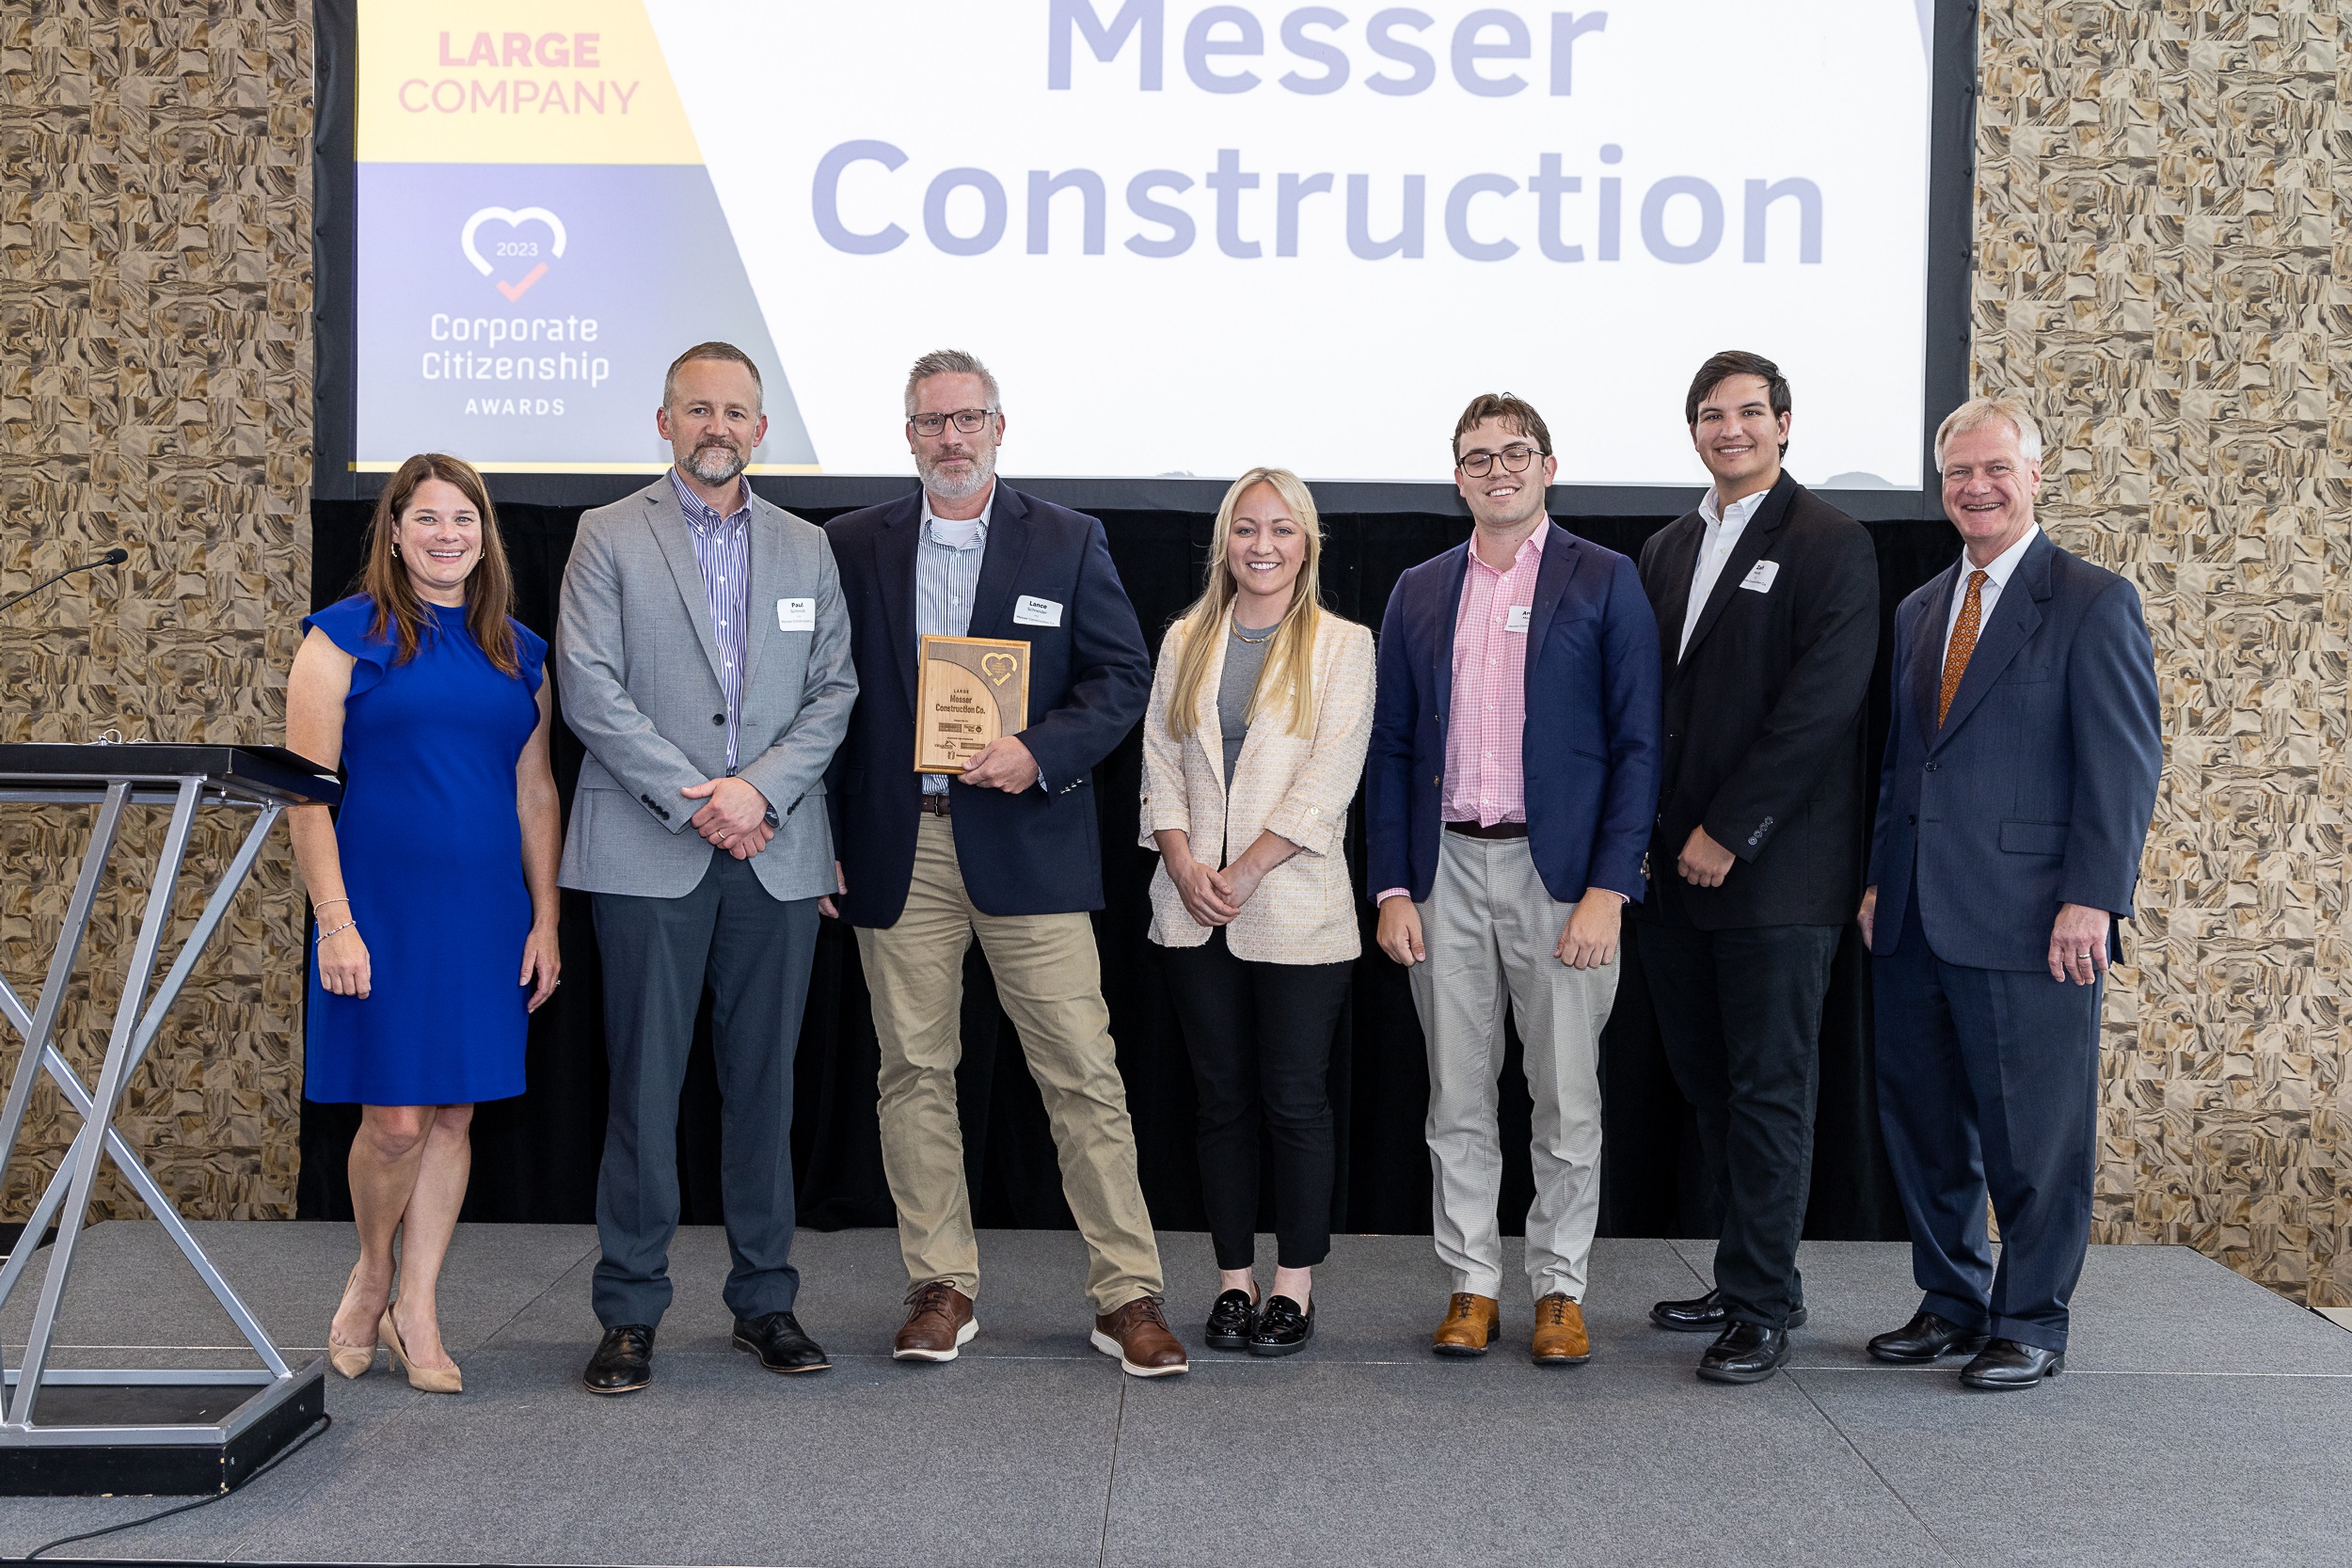 Messer Construction Company employees on stage accepting an award